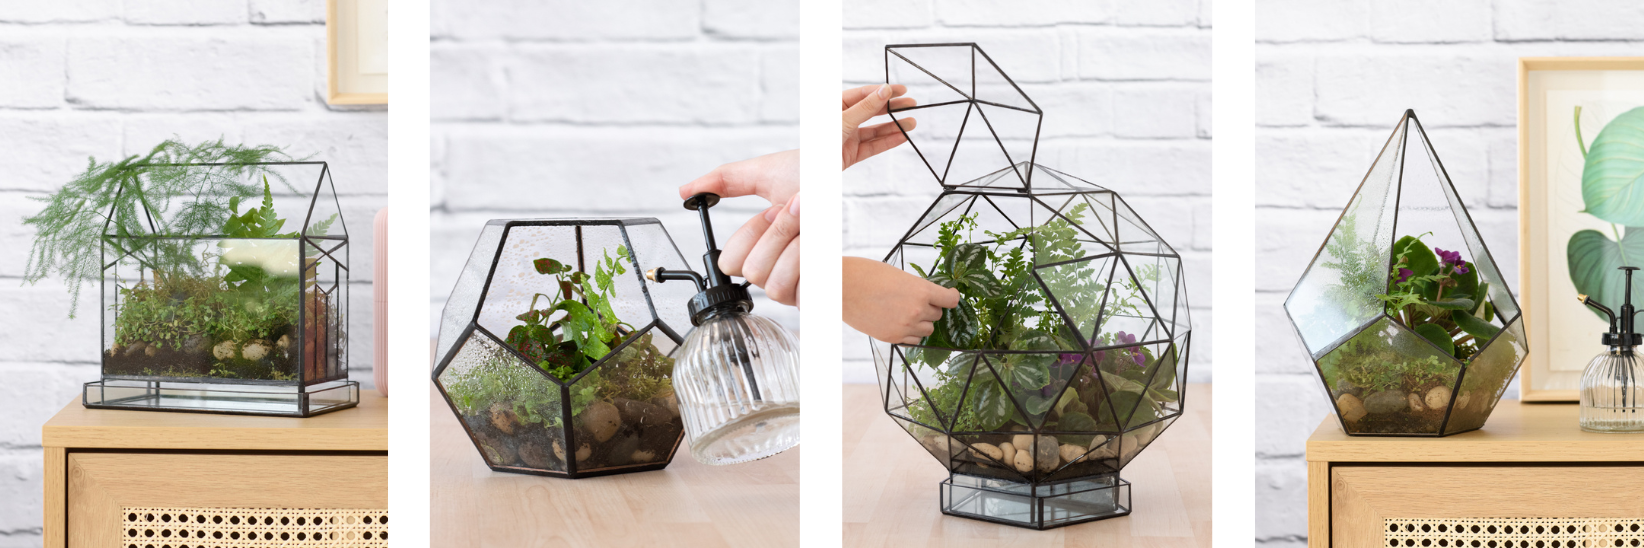 Terrariums - Build Your Own Ecosystem at Home